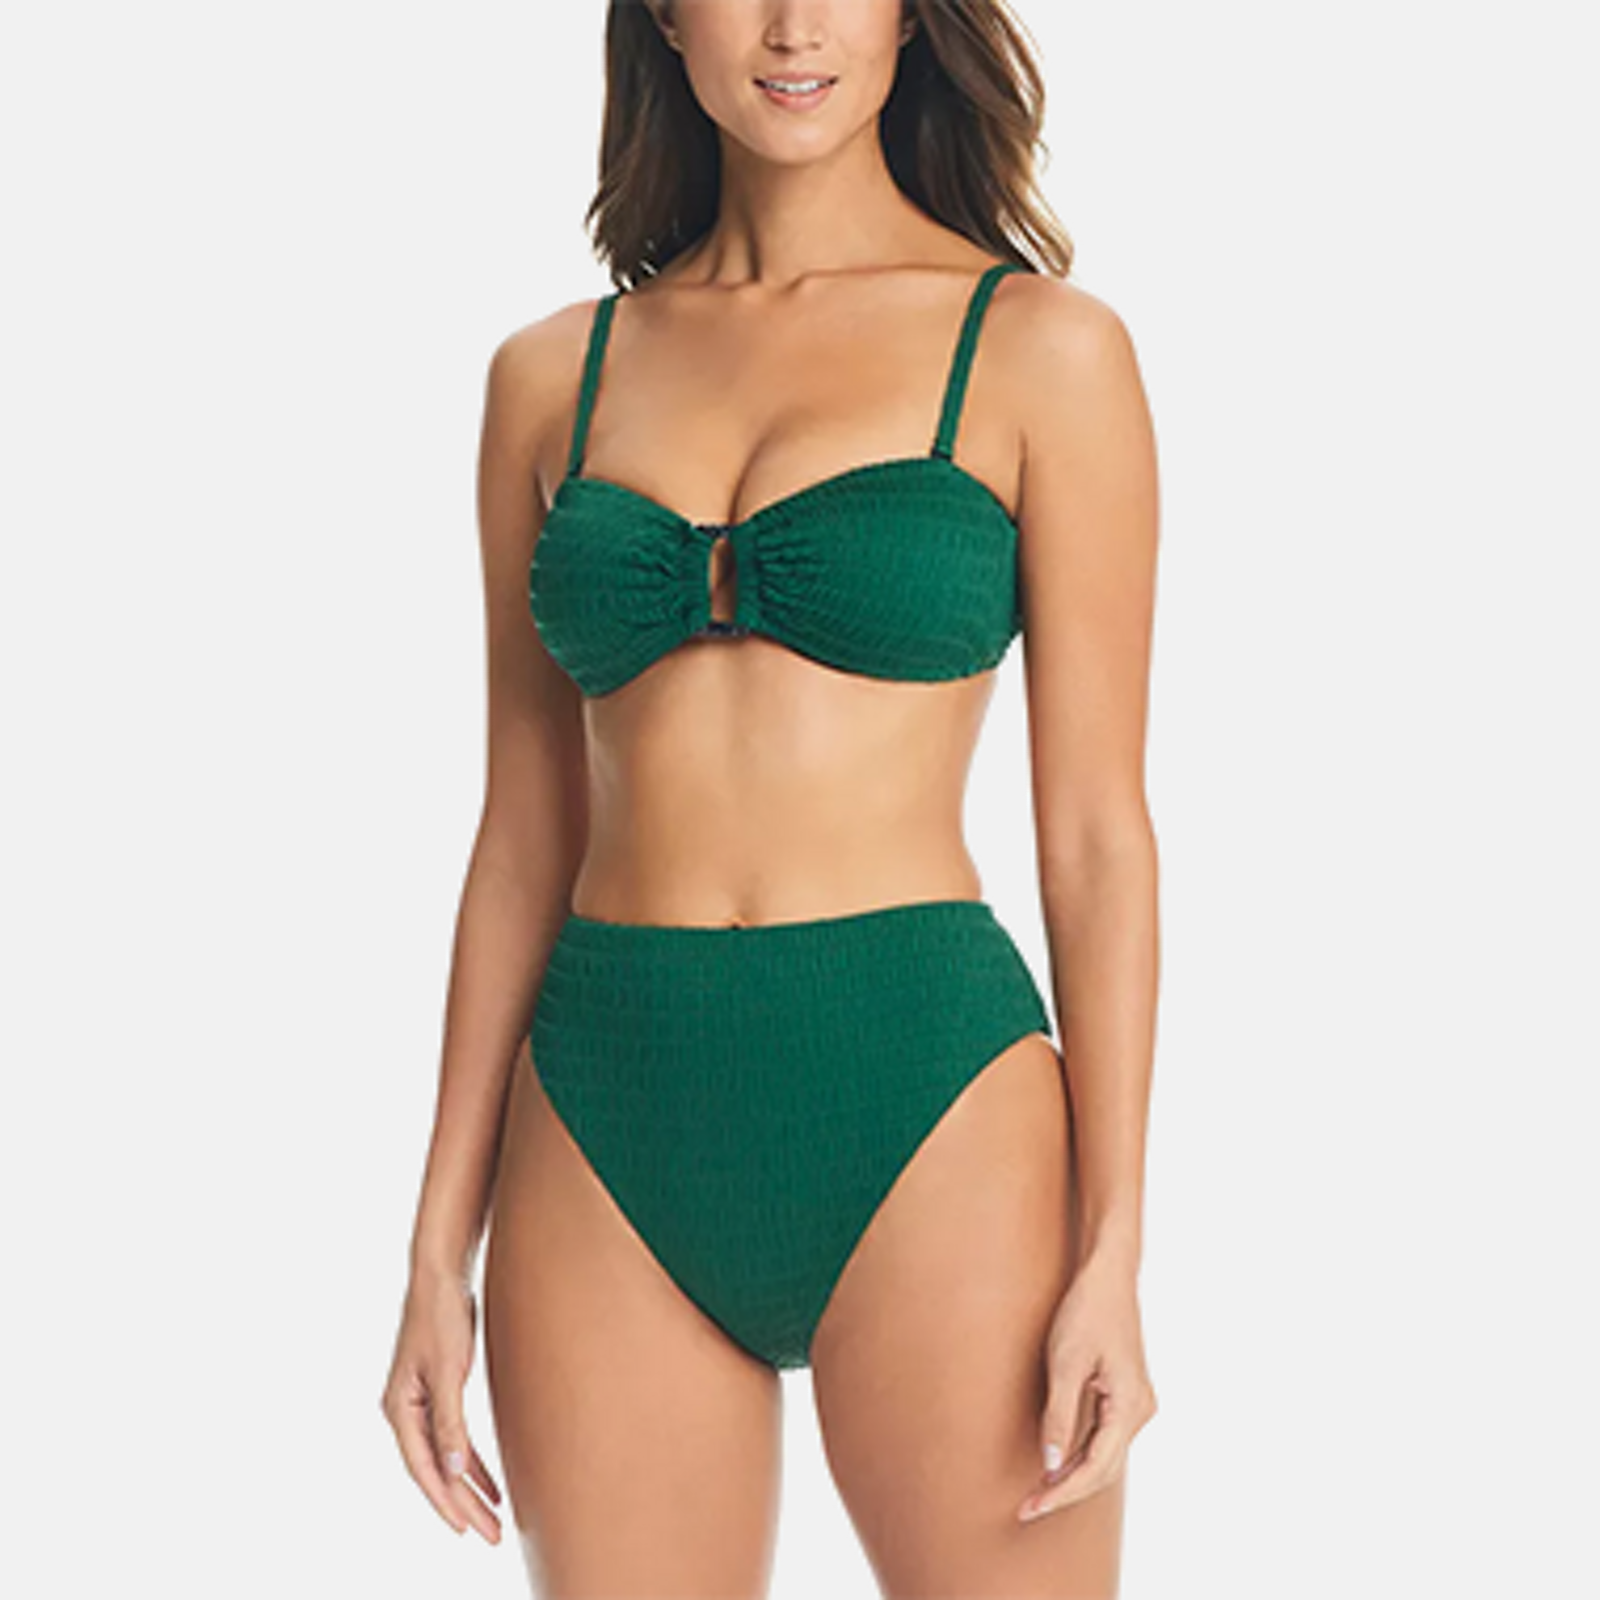 Green Swimsuits and Cover-ups for Women - Macy's